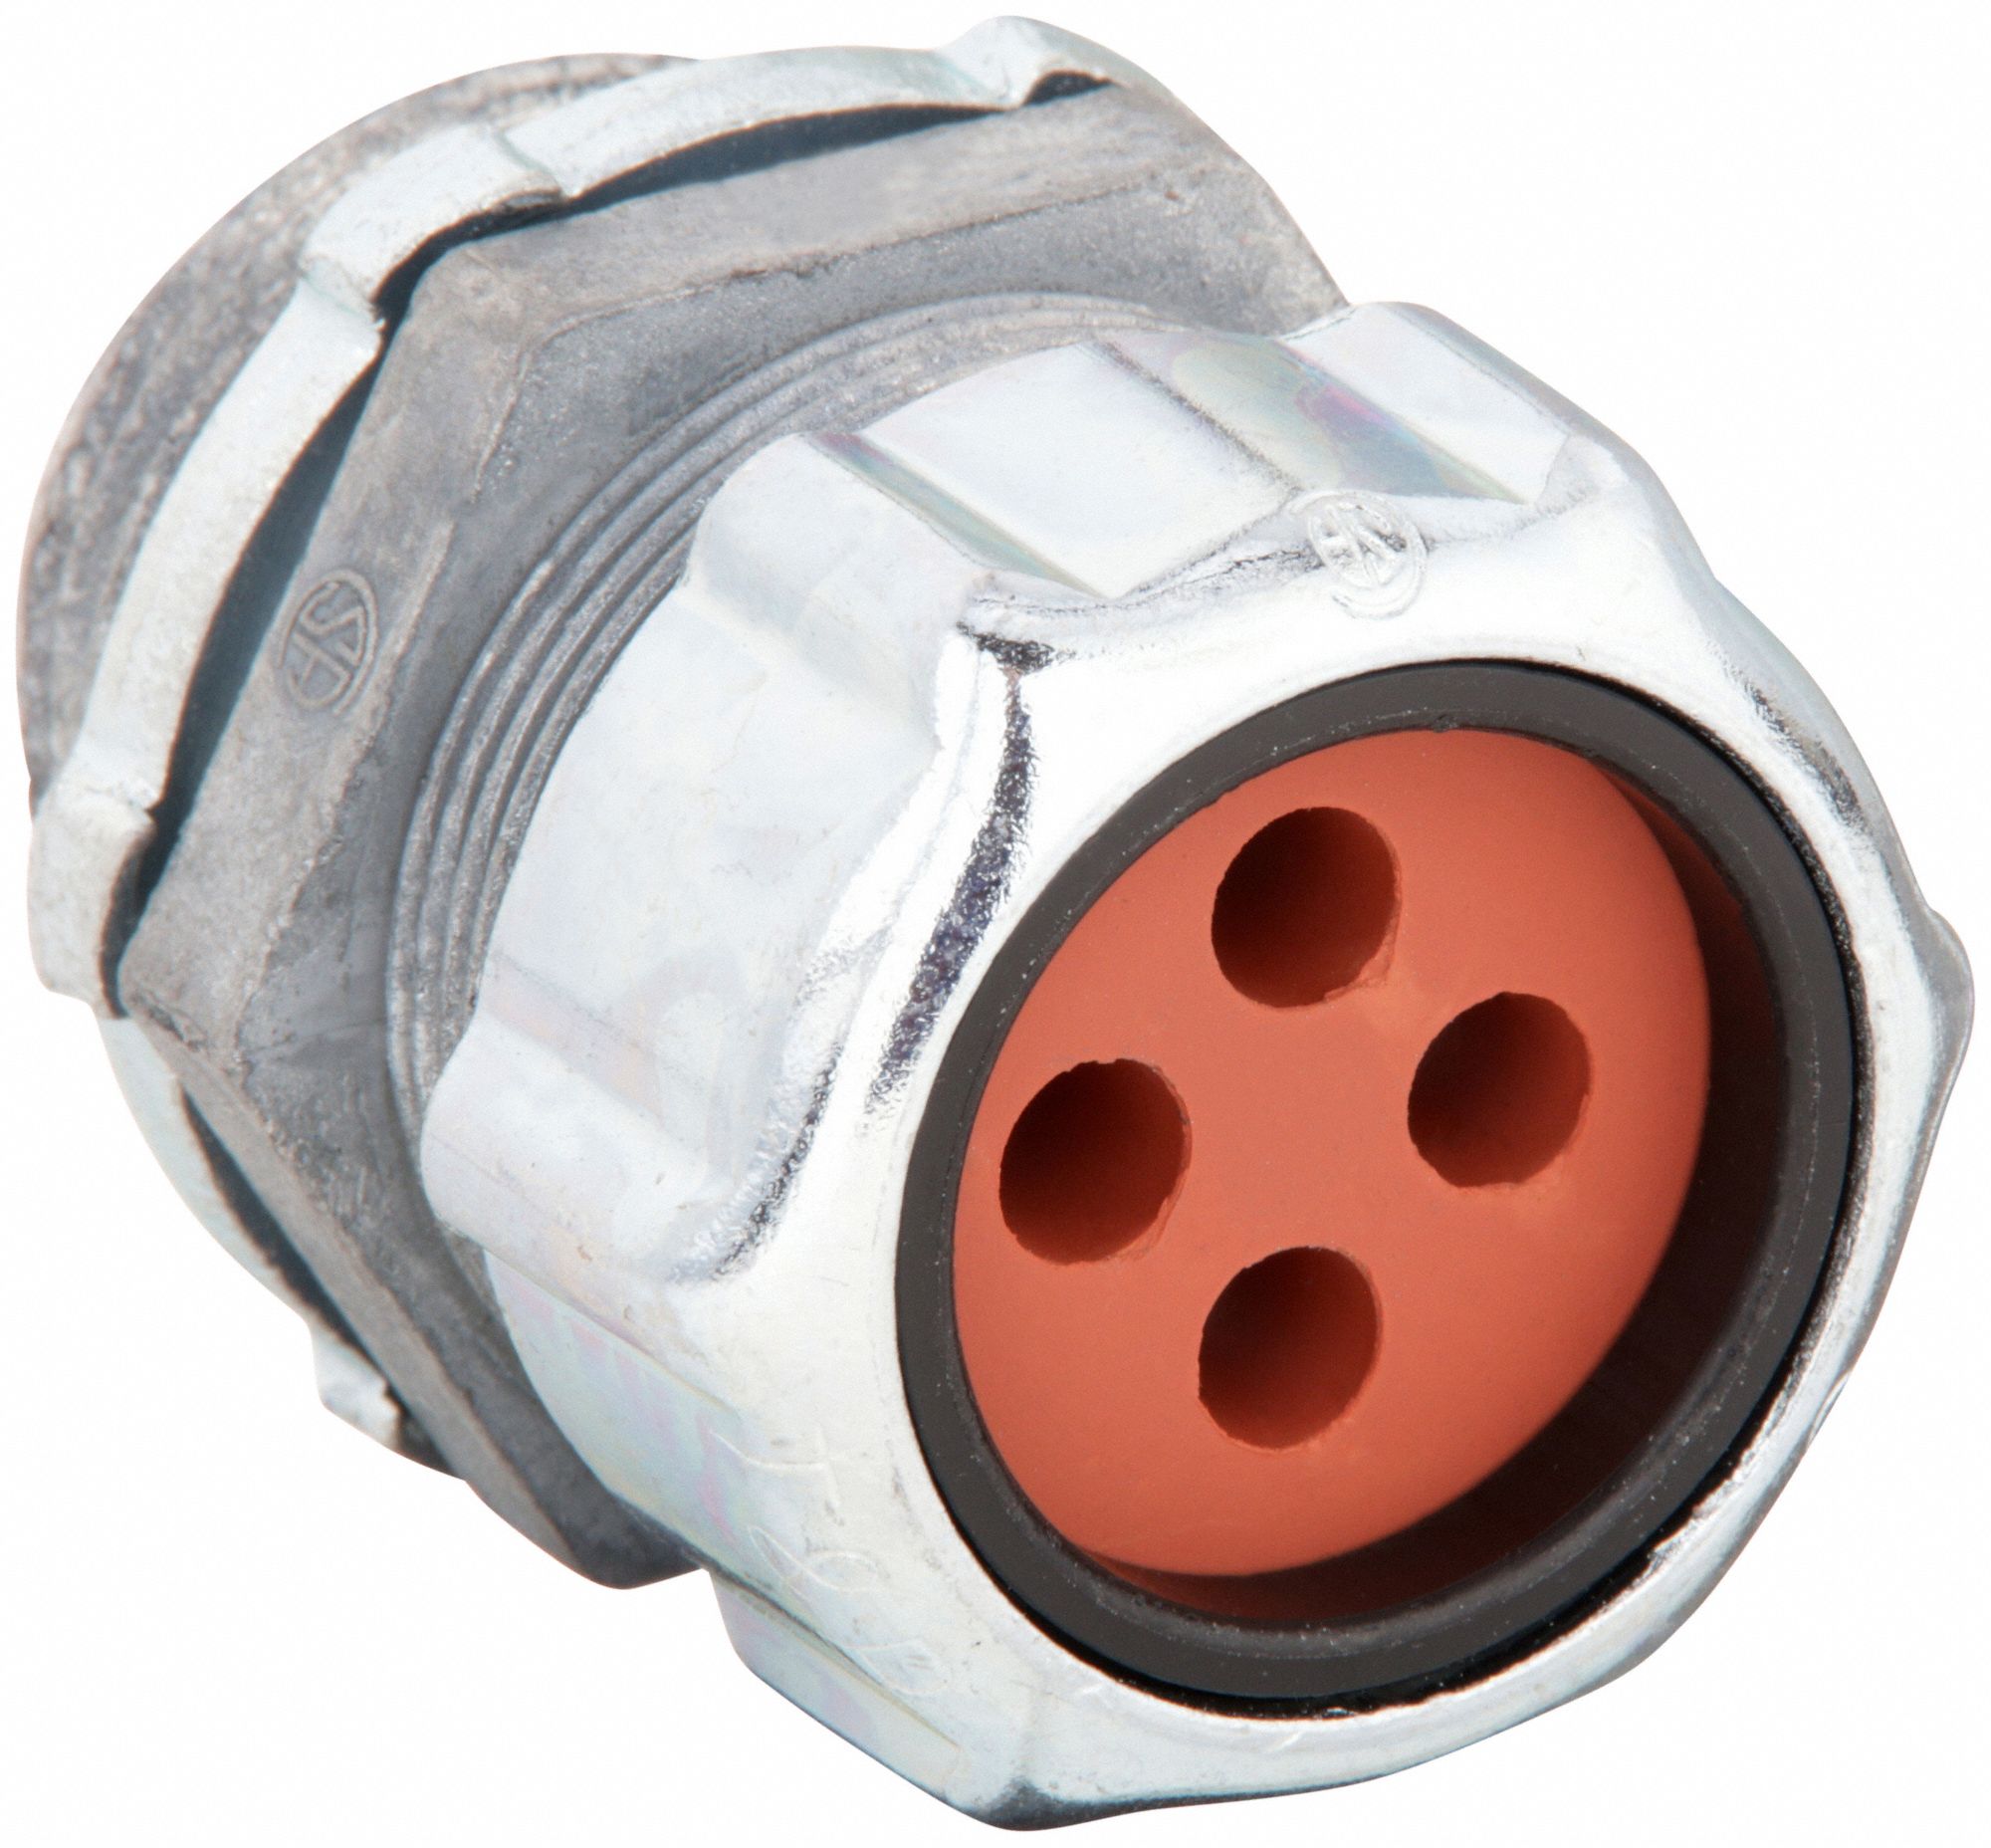 Gampak 49212 0.5 in. Strain Relief Cord Connector 